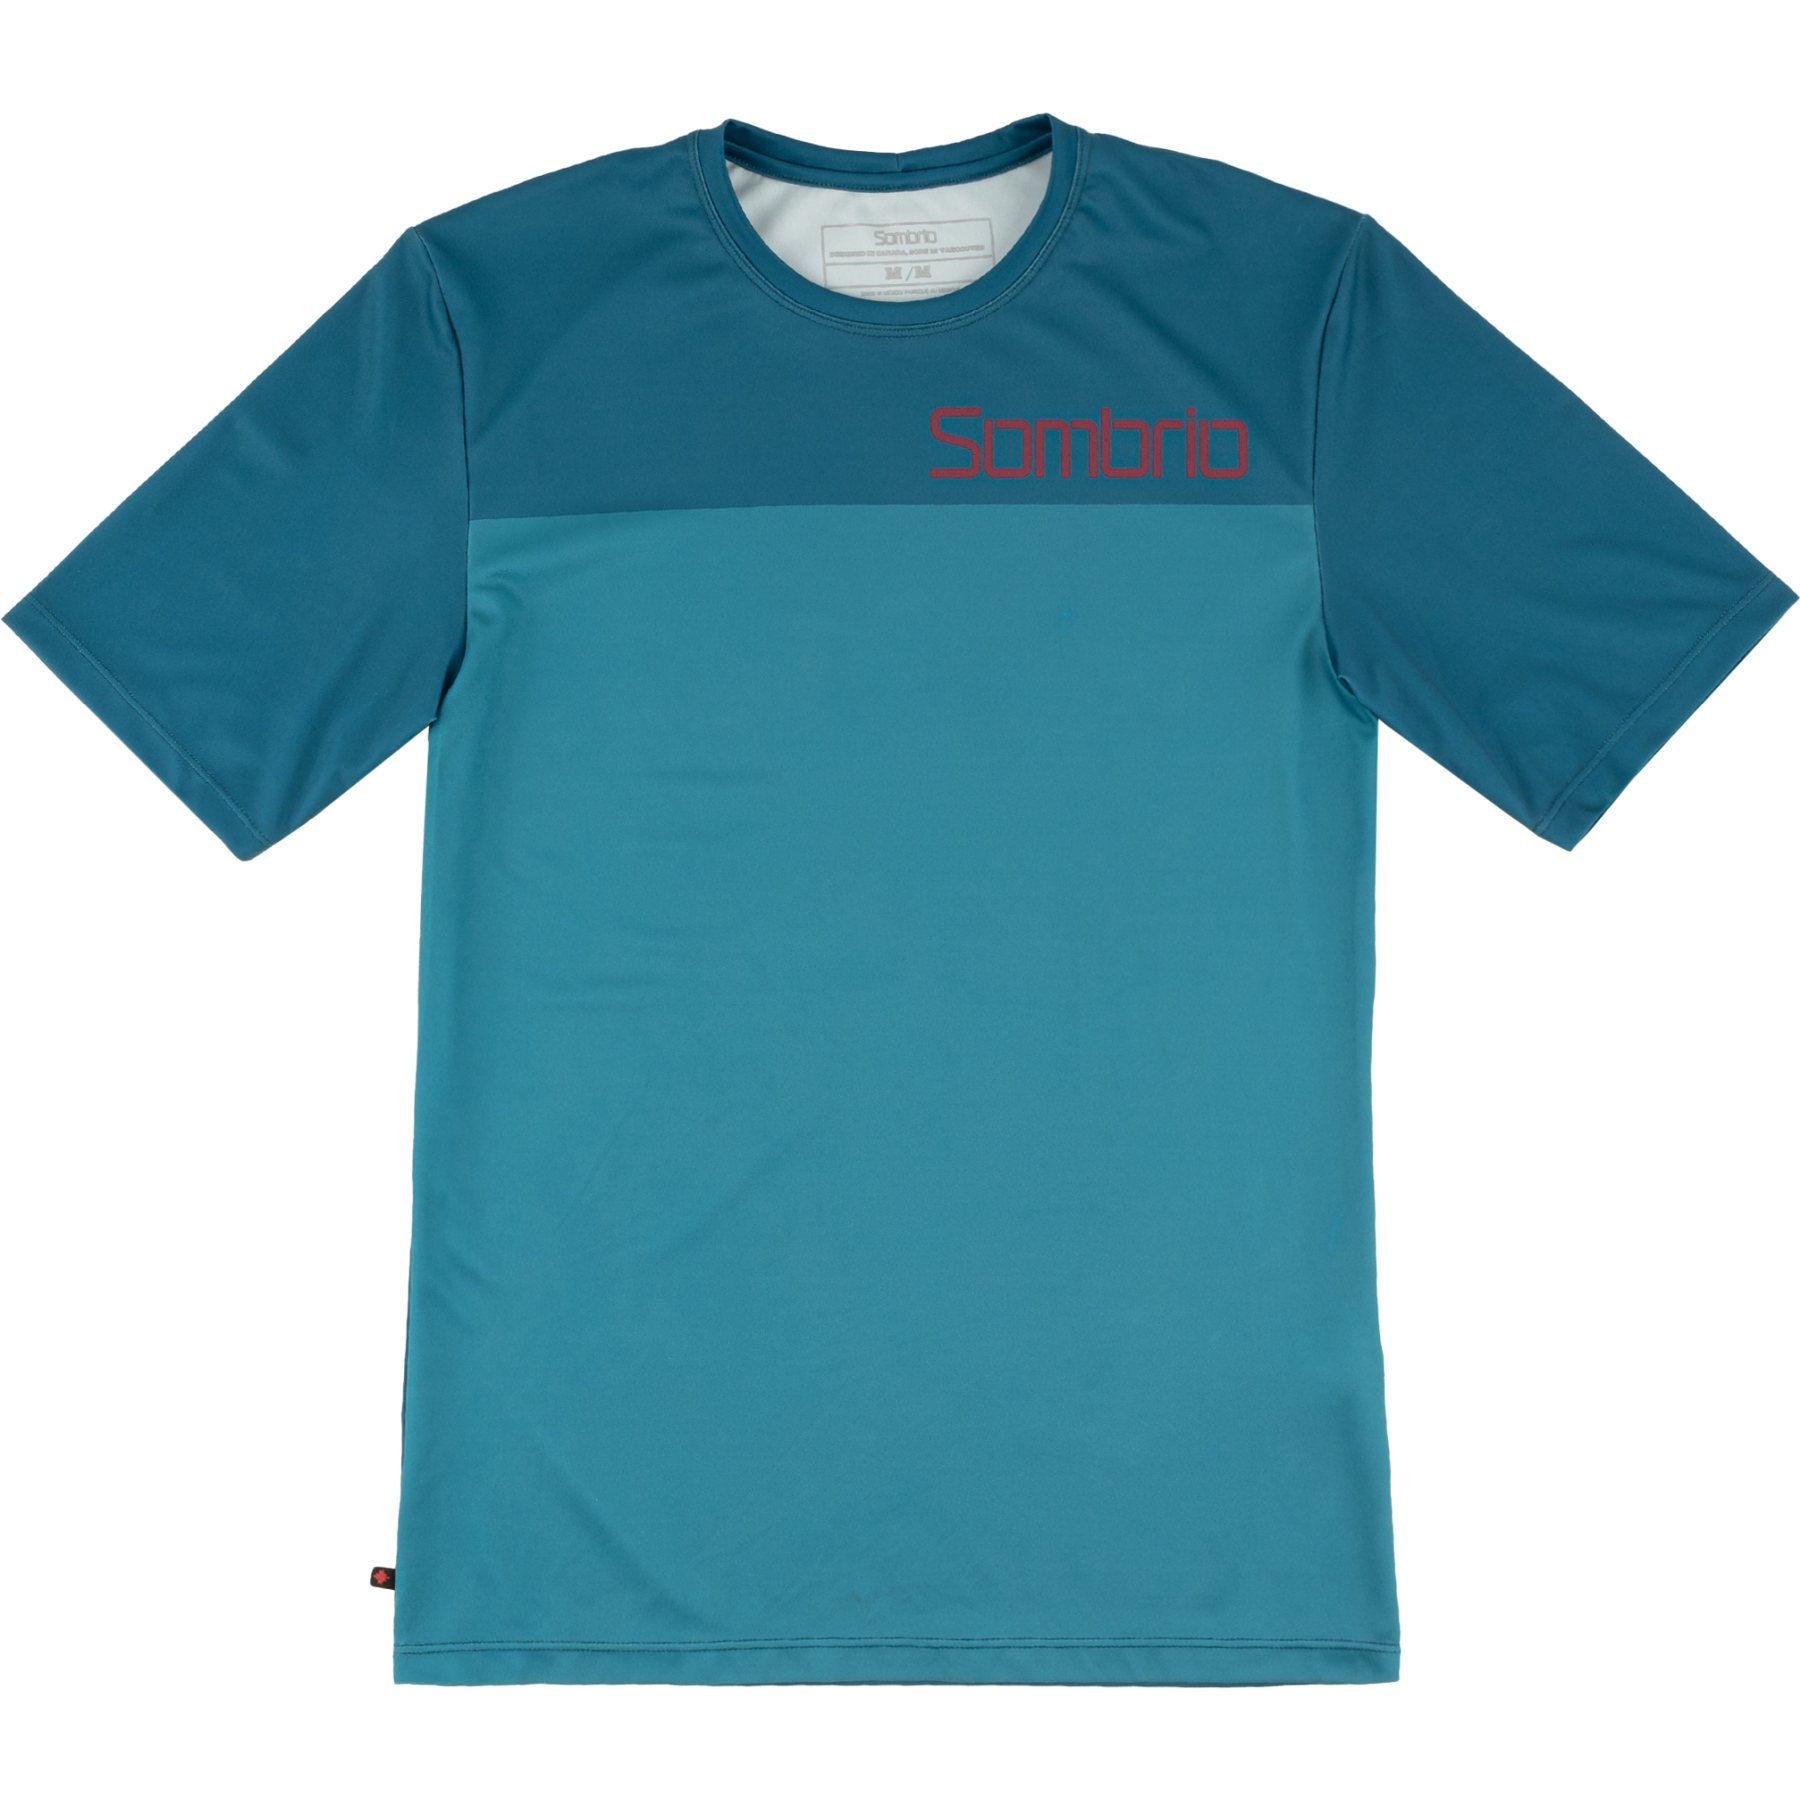 Picture of Sombrio Freeride Renegade 2 Jersey - Boreal Blue/Midnight Blue